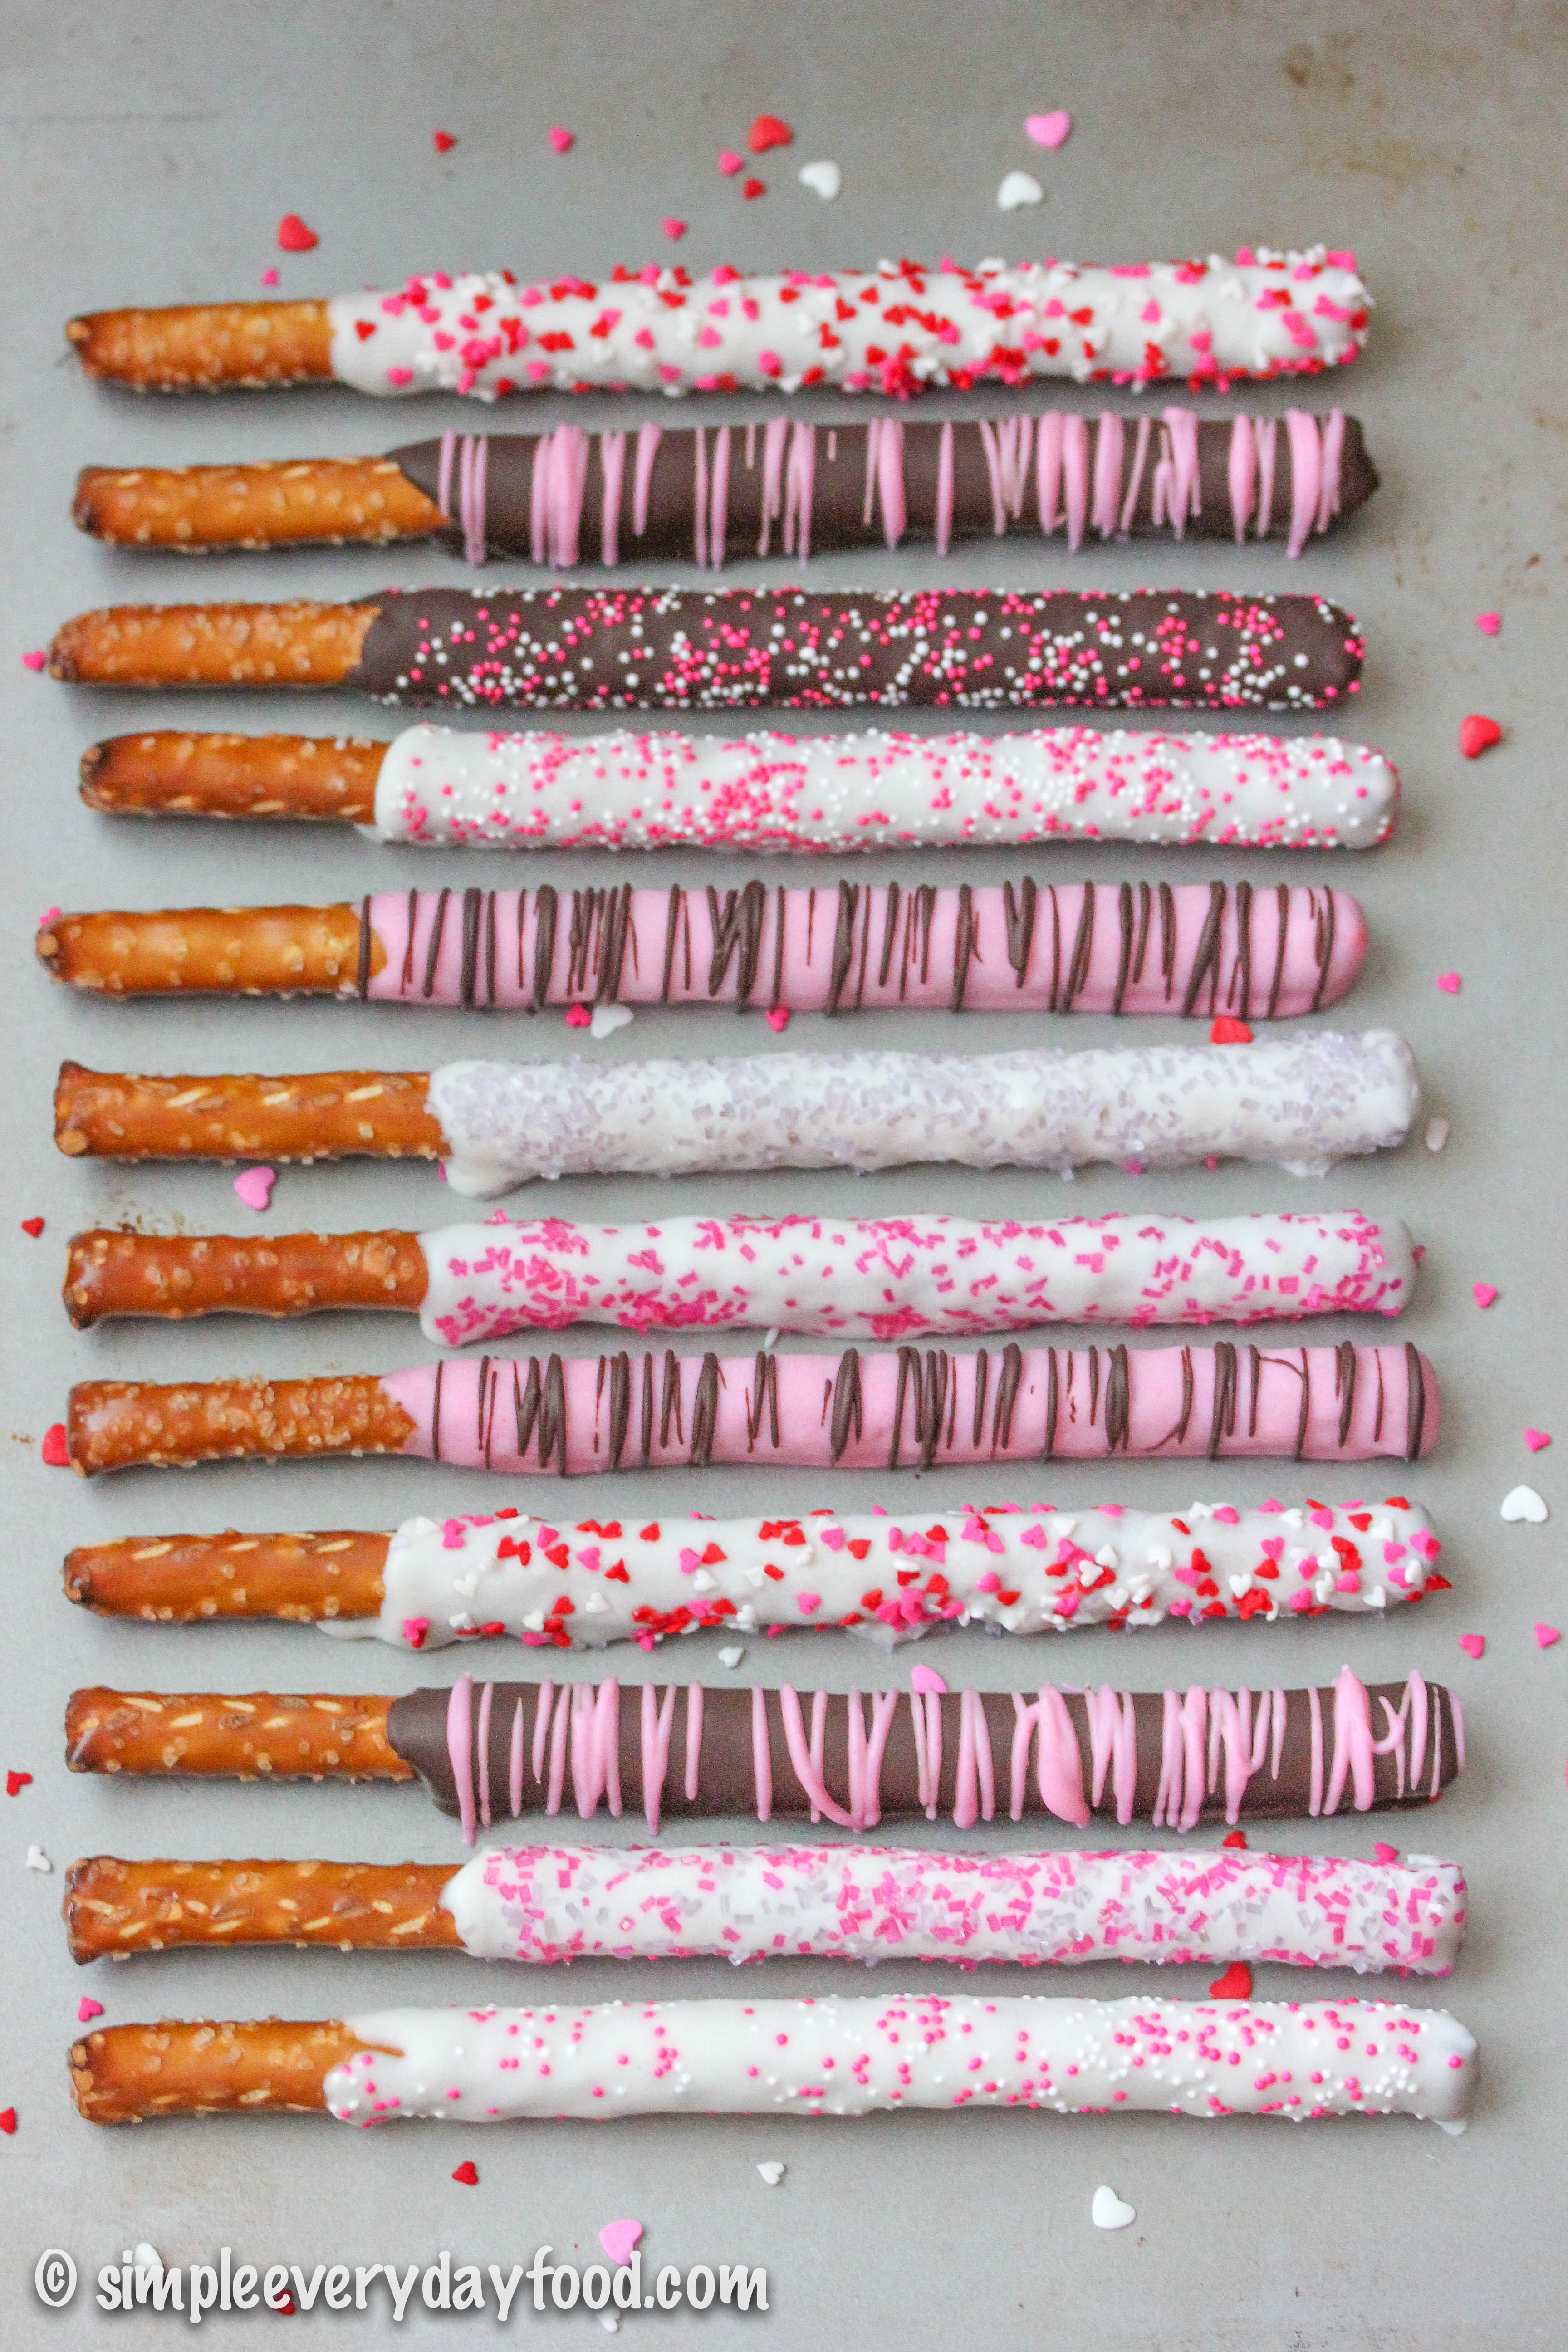 chocolate-covered pretzel rods - Simple Everyday Food